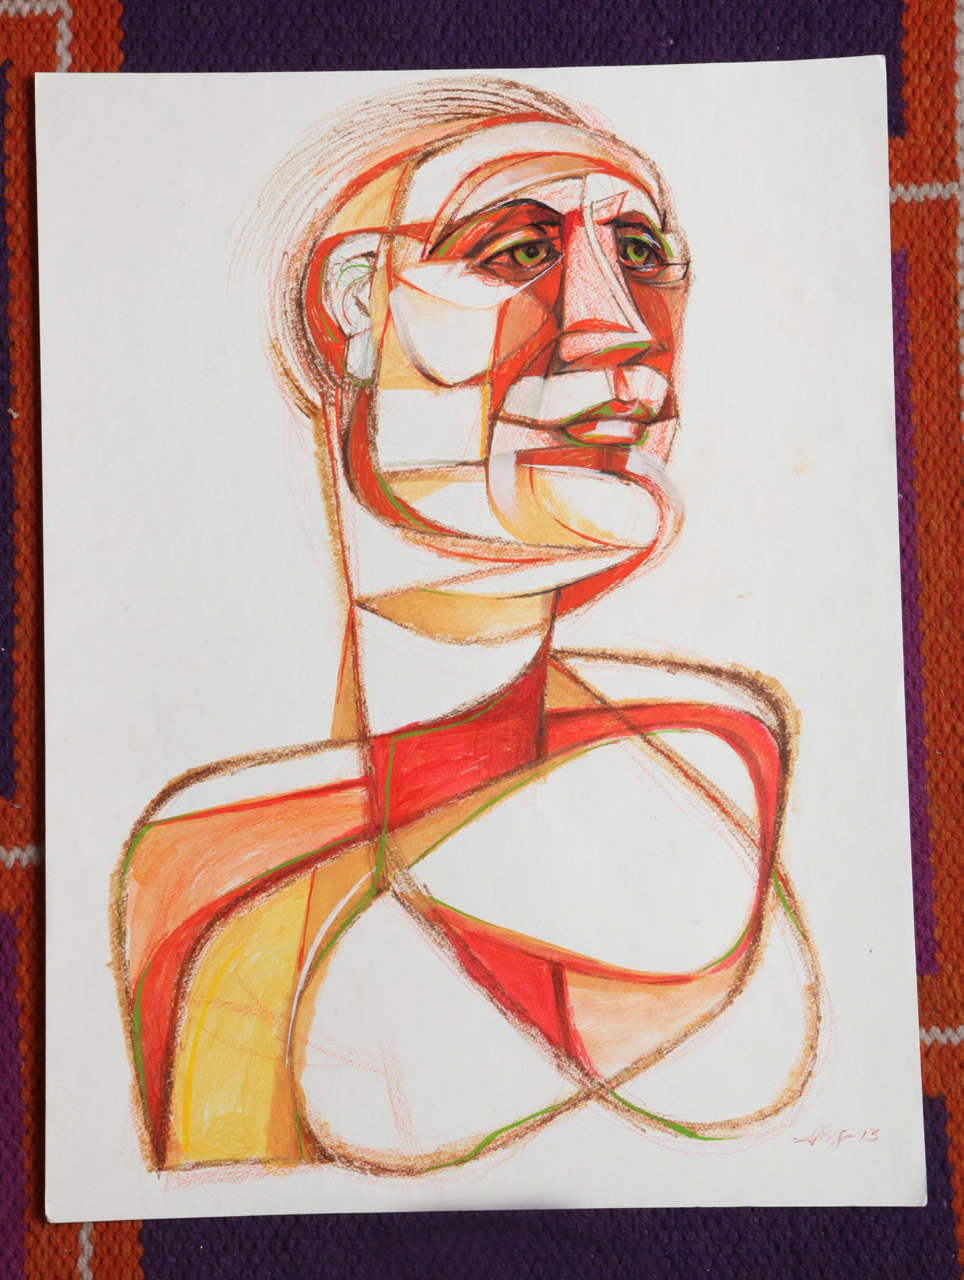 Contemporary Art with seductive characters.
Handsome Mixed media painting (acrylic, pencil, ink) on watercolor paper. Interesting study of the male.